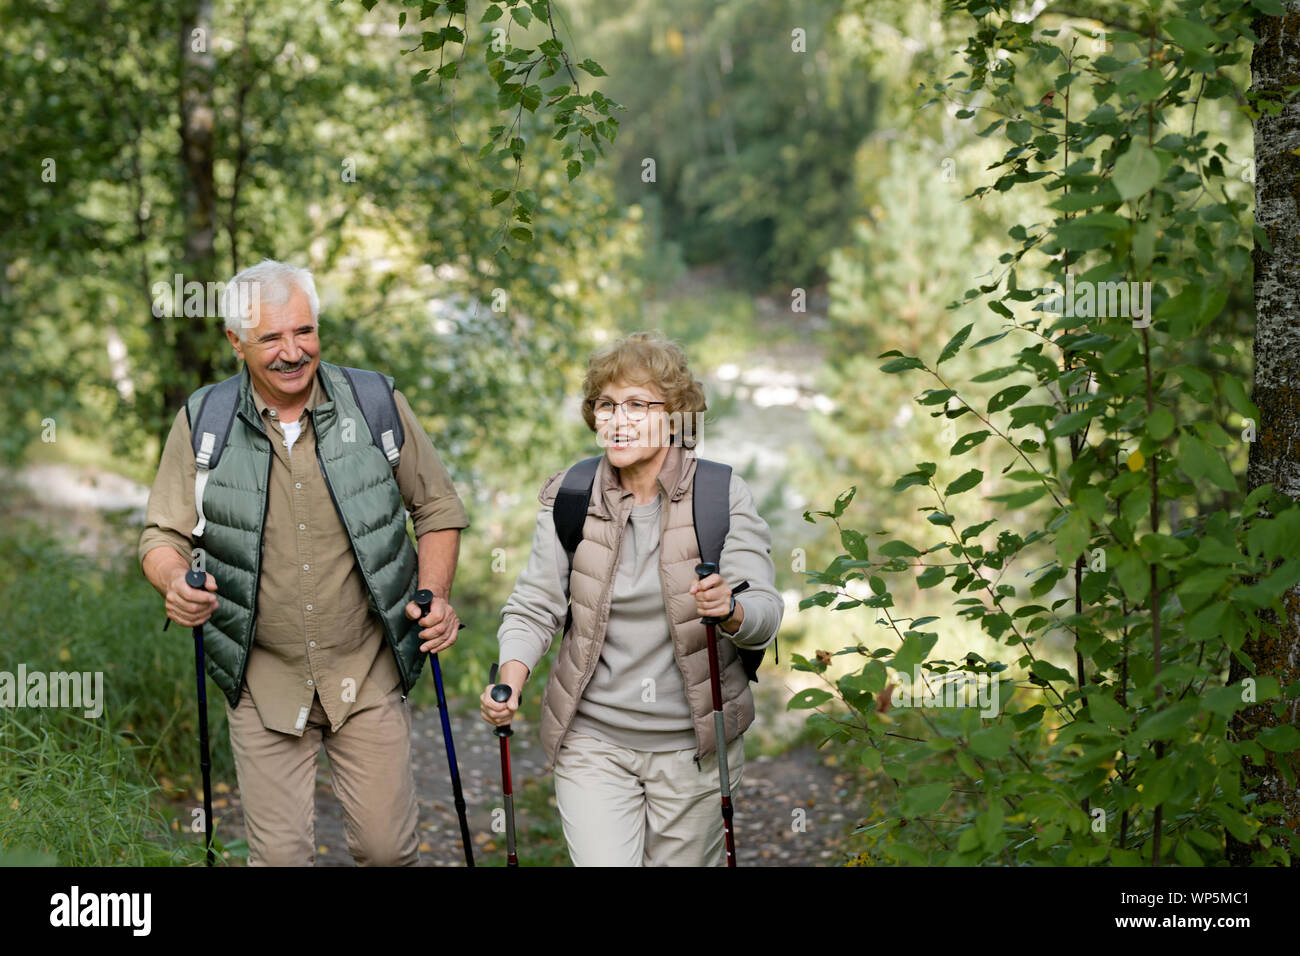 Cheerful mature active couple enjoying trekking in the forest or park Stock Photo